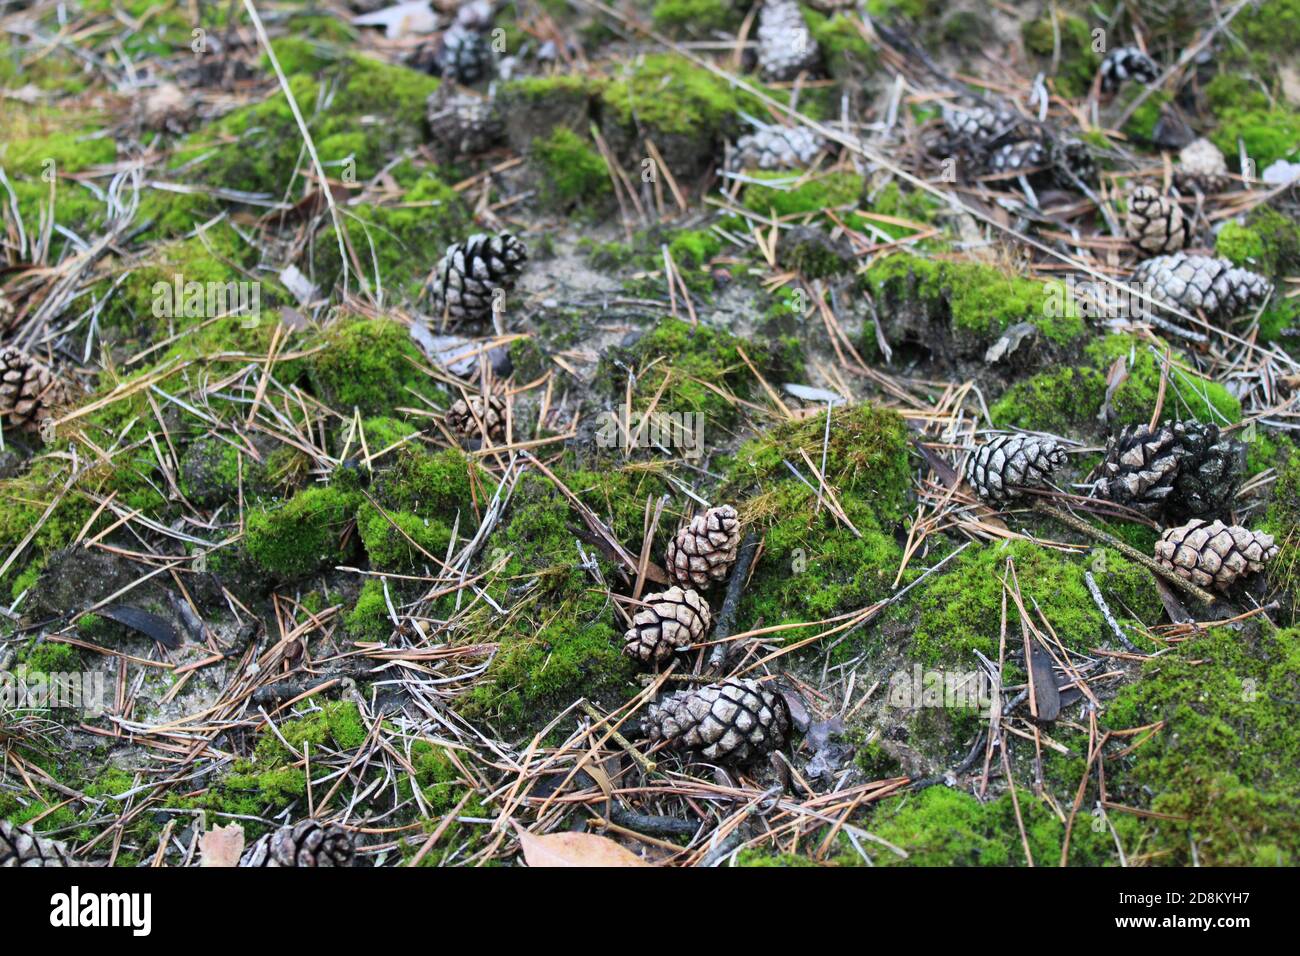 strobili pine cones and needles on the forest floor with moss Stock Photo